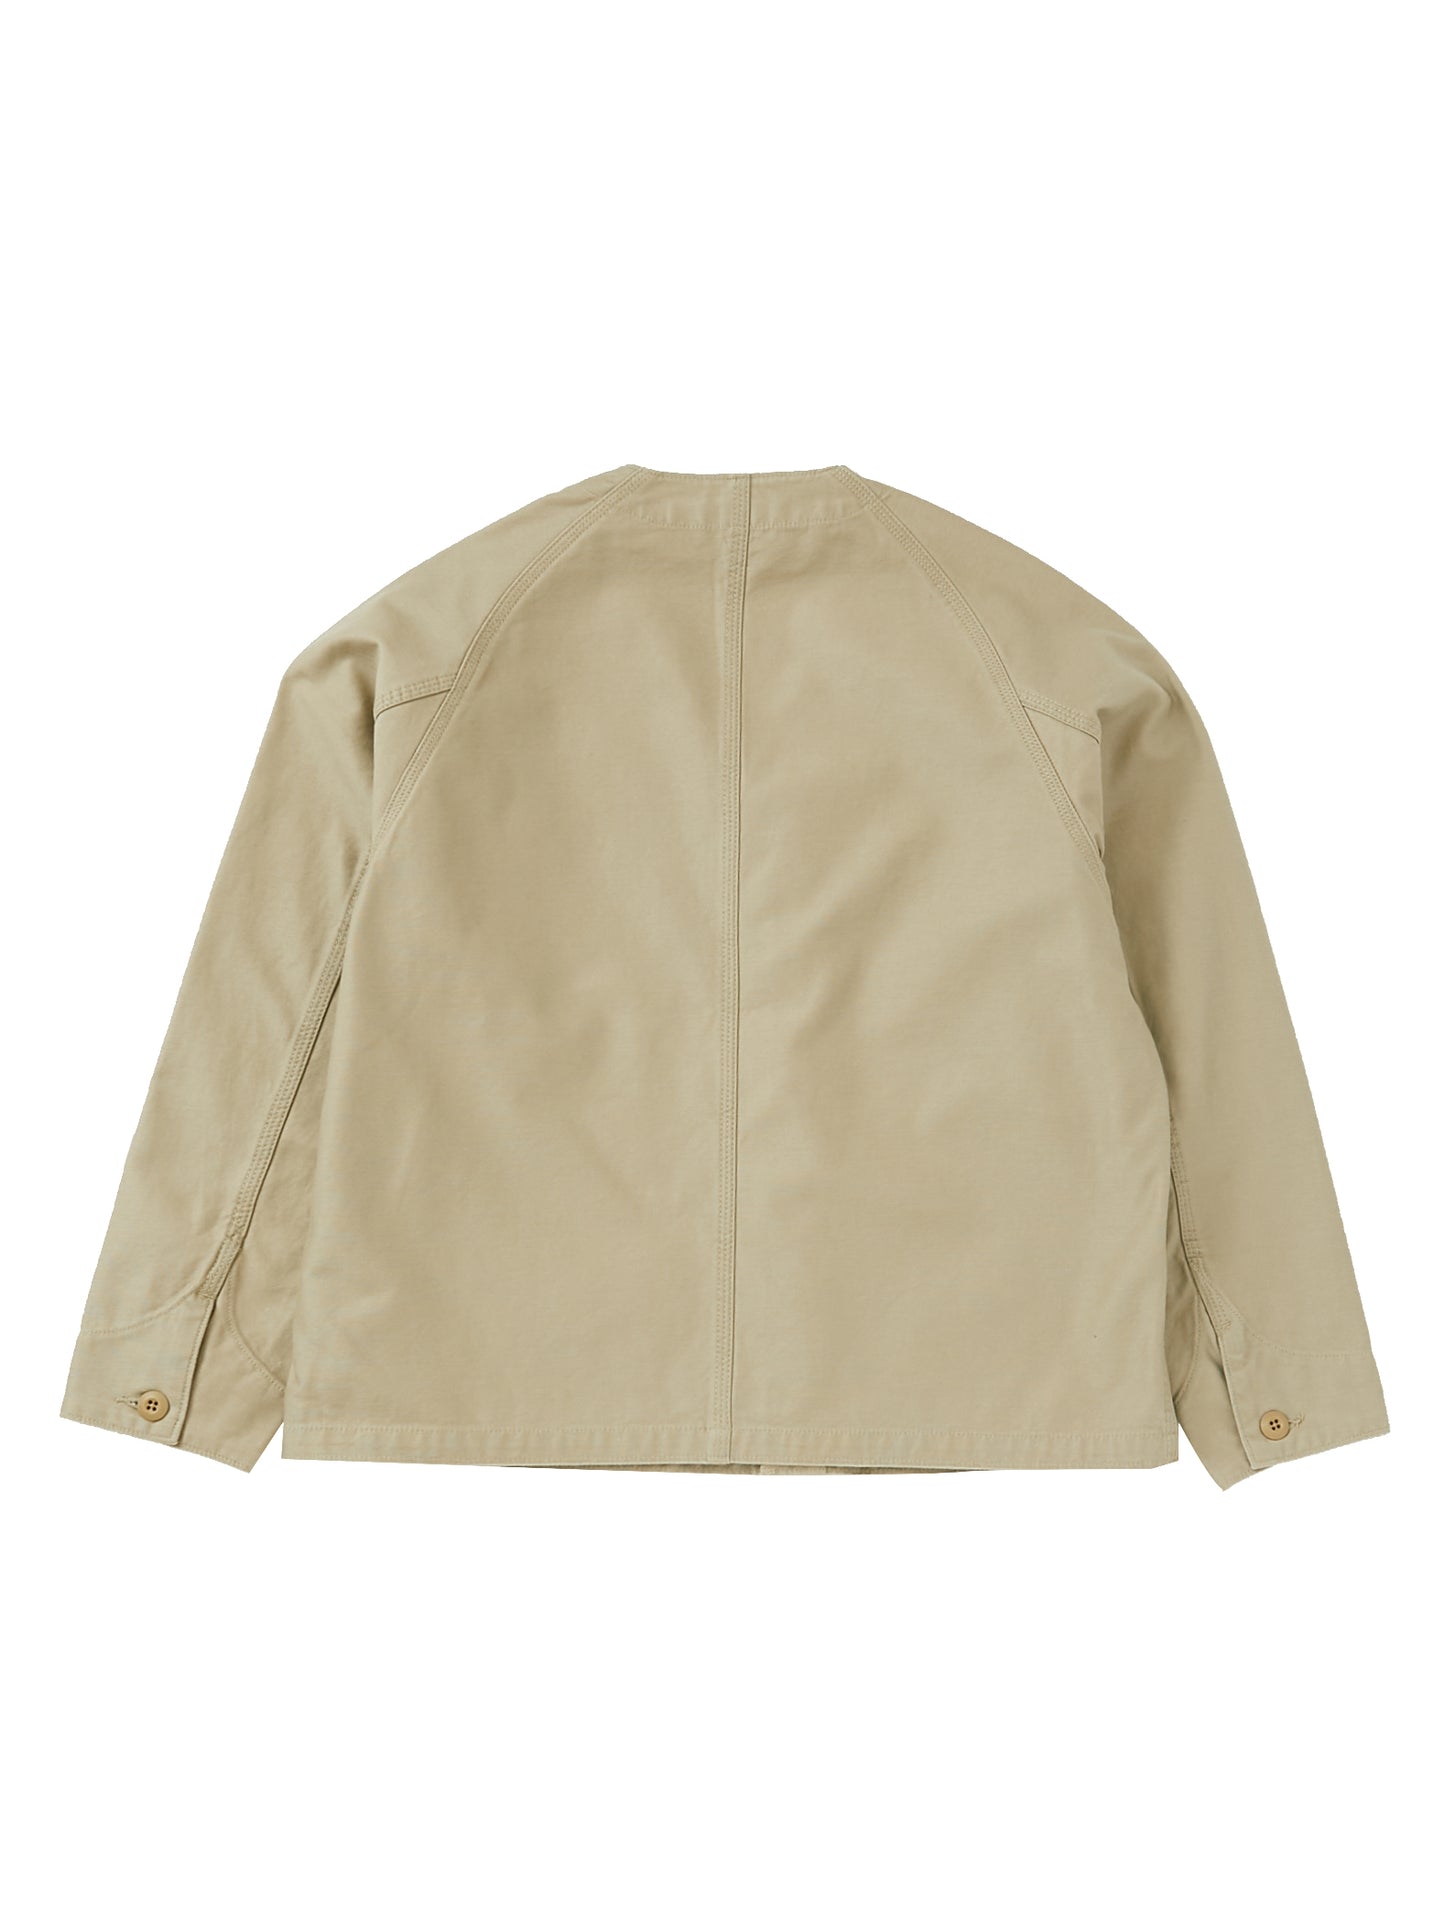 GUNG HO / WOMEN'S THE EXPEDITION JACKET